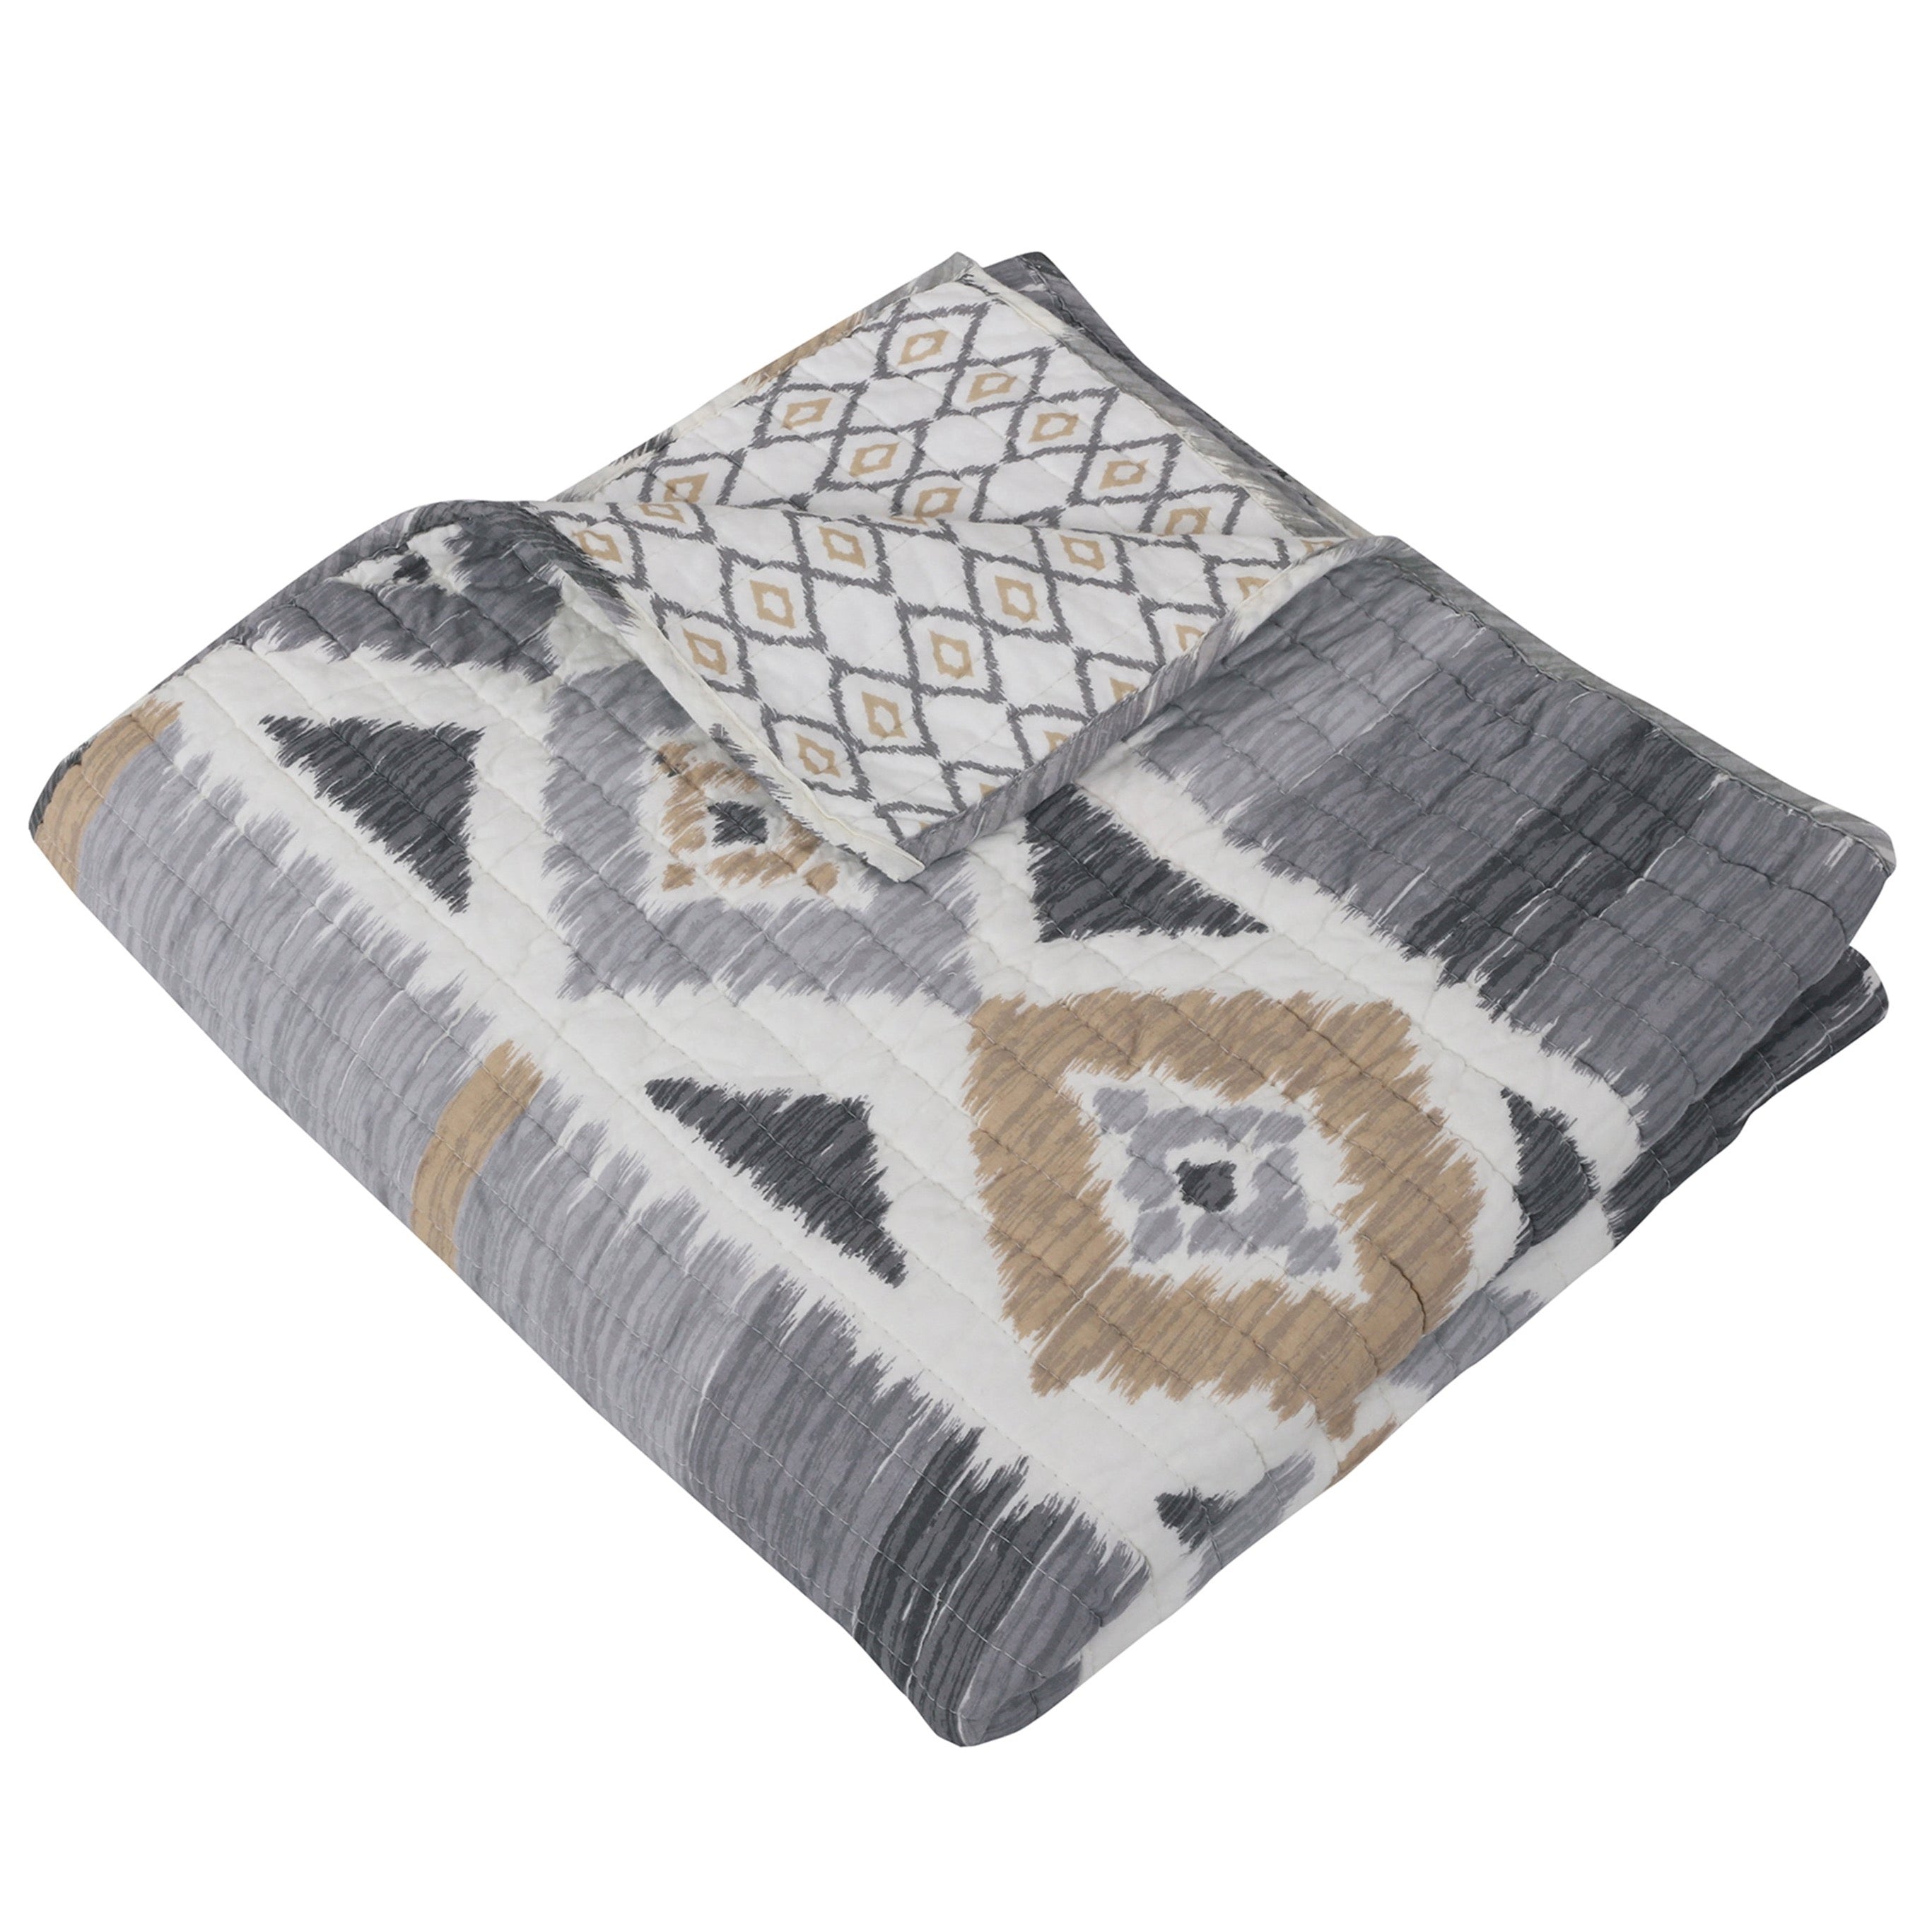 Santa Fe Quilted Throw